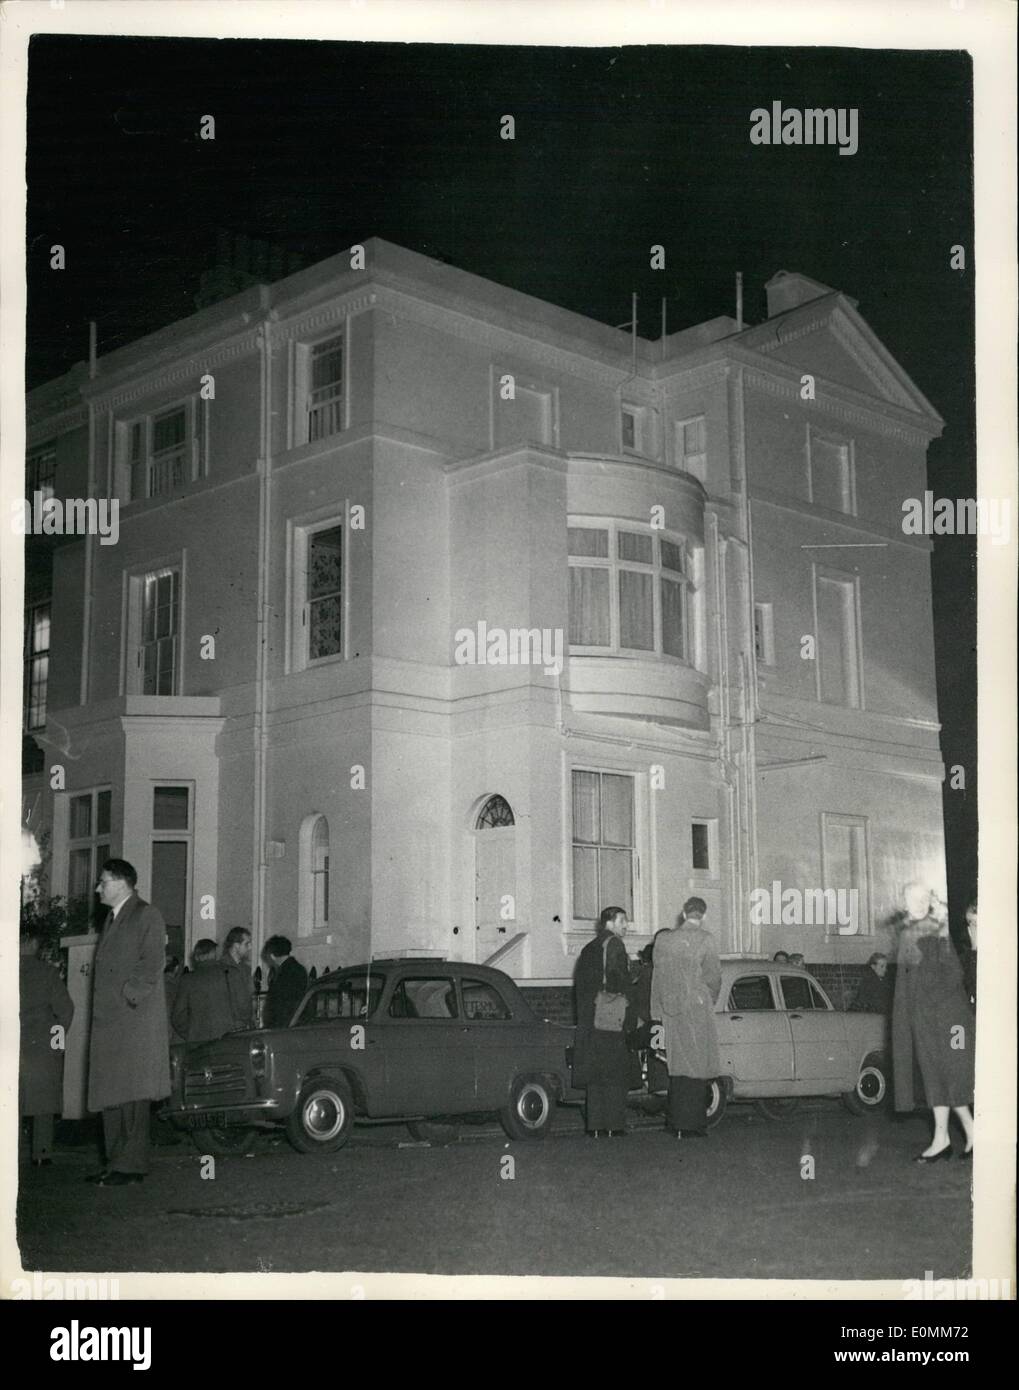 Oct. 10, 1955 - PRINCESS MARGARET AND CAPTAIN TOWNSEND DINE AT HOME OF MUTUAL FRIEND. KEYSTONE PHOTO SHOWS: View of the home - 42 Victoria Road, Kensington, last evening - when a dinner party was held there by MR. MARK BONHAM CARTER - for PRINCESS MARGARET and CAPTAIN TOWNSEND. Stock Photo